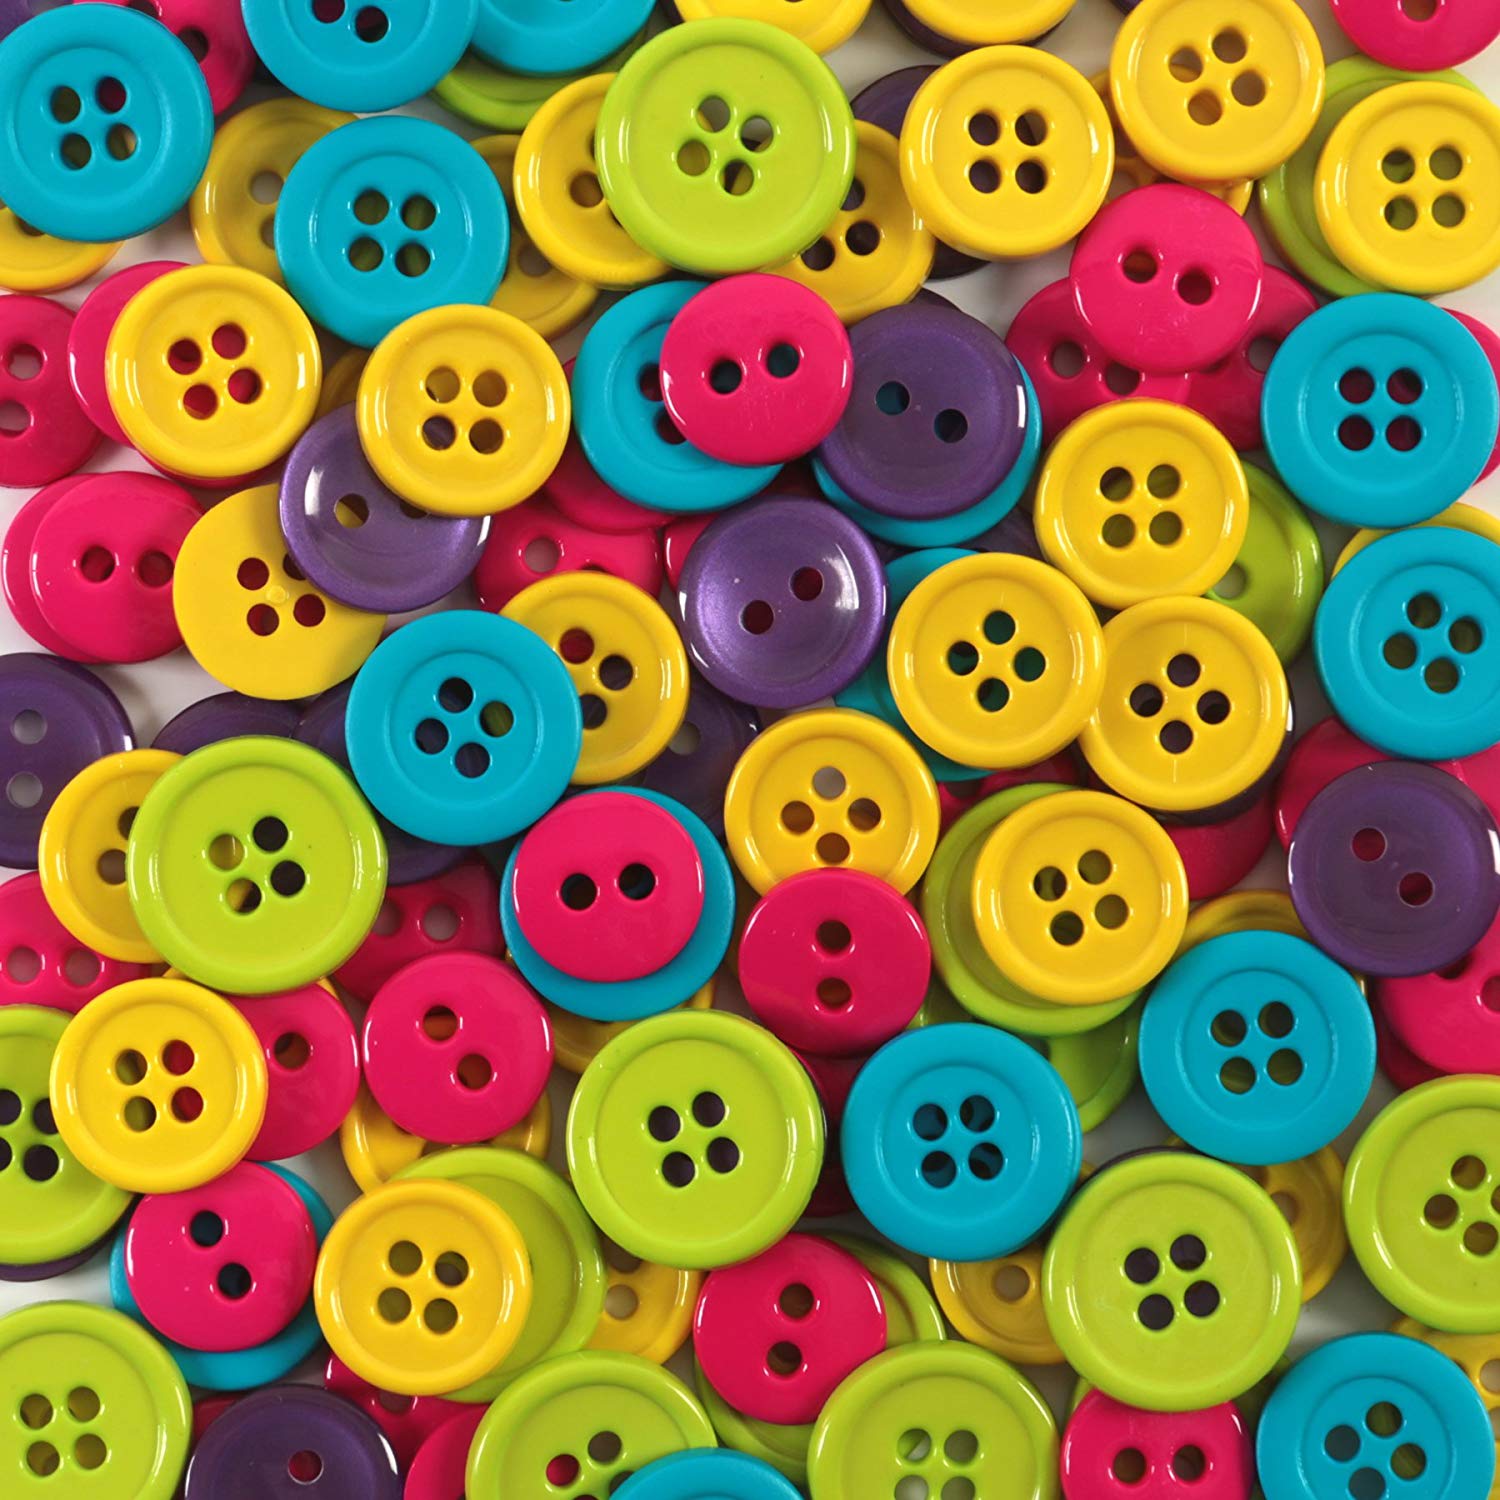 Fun Bright Colored Round Buttons by Favorite Findings